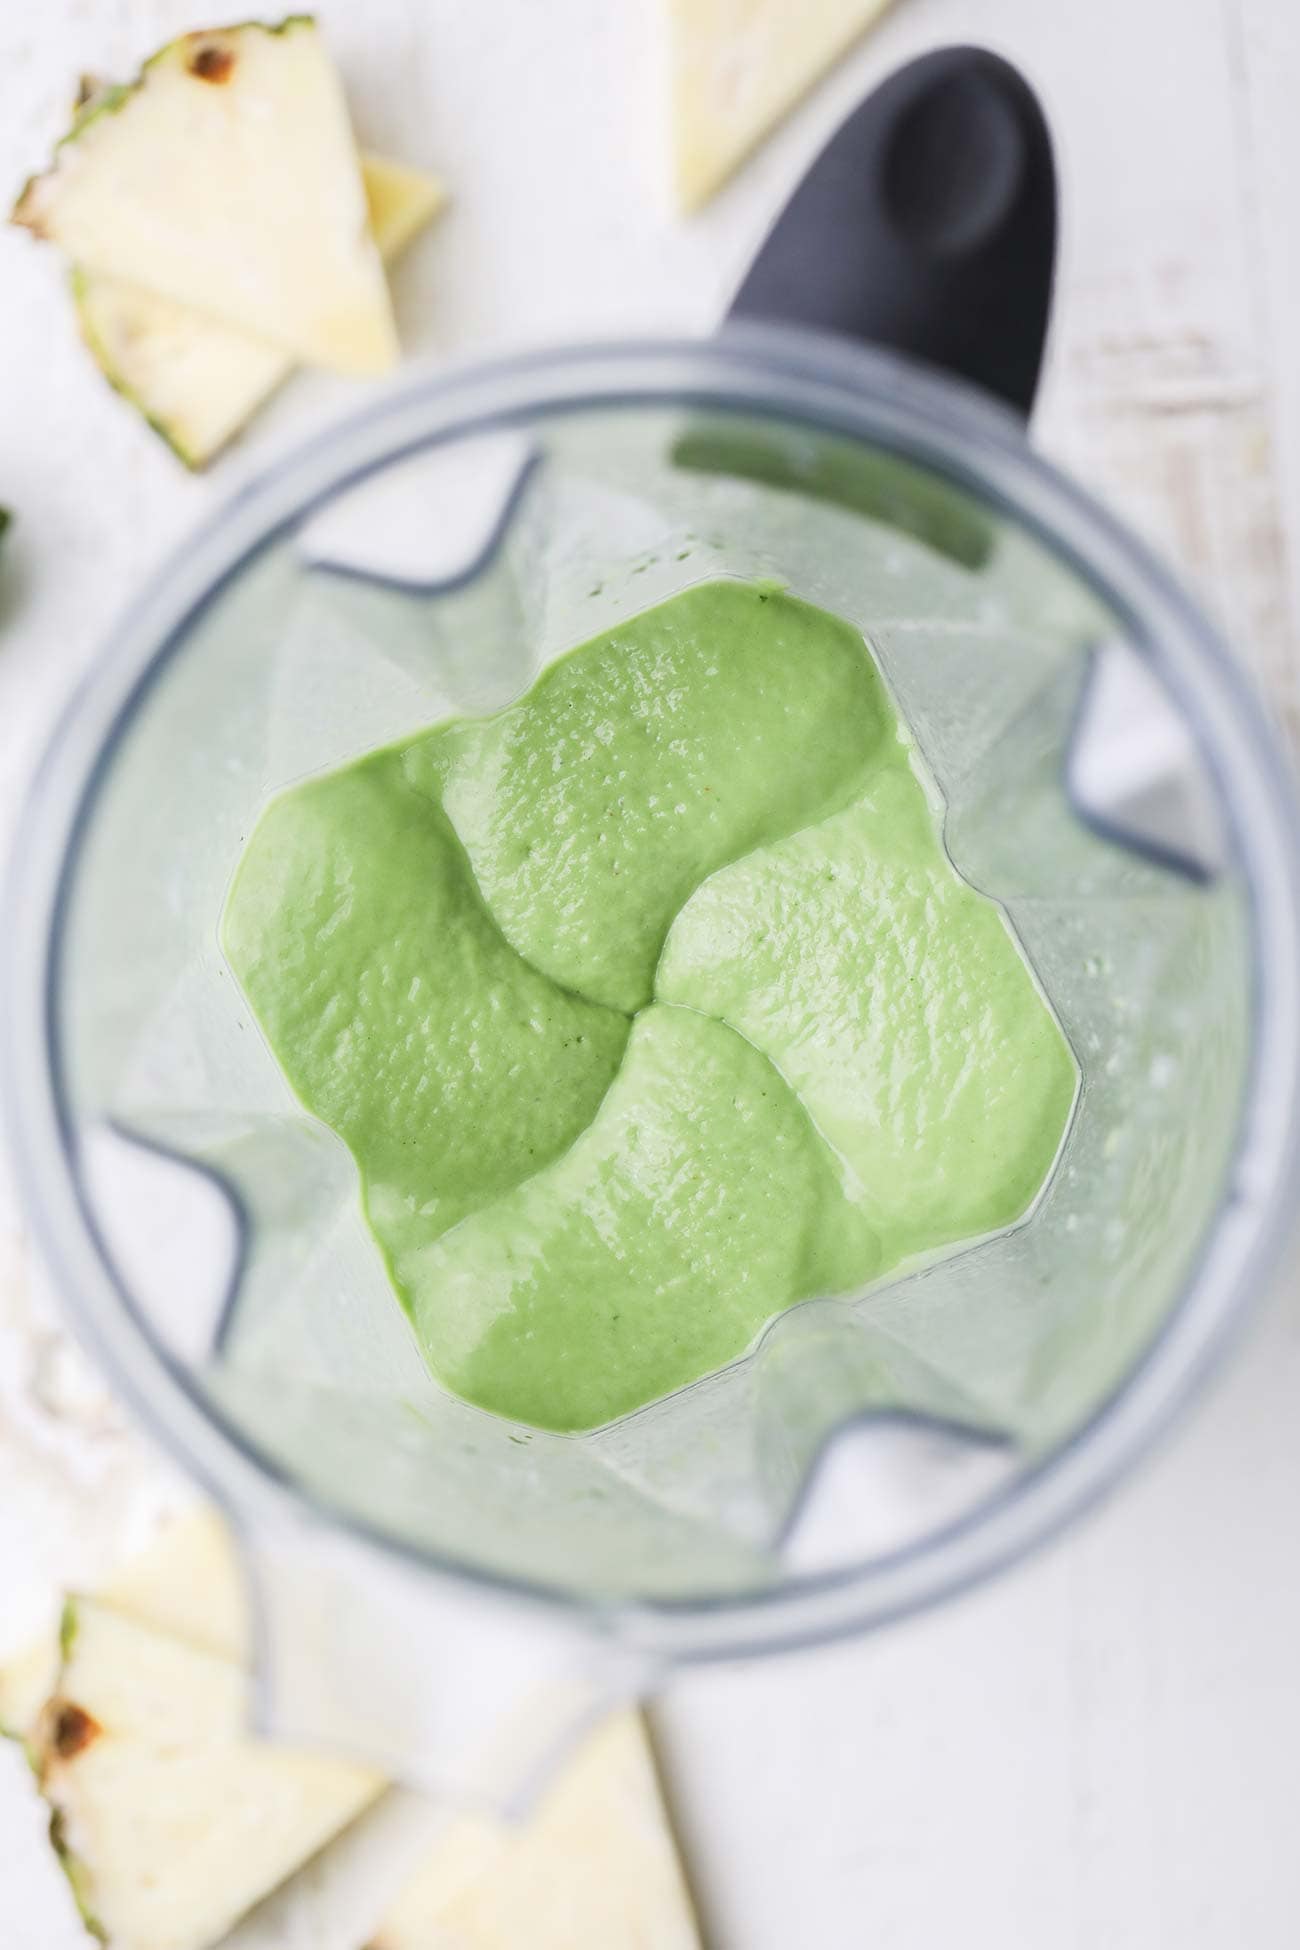 A creamy green smoothie in a blender.